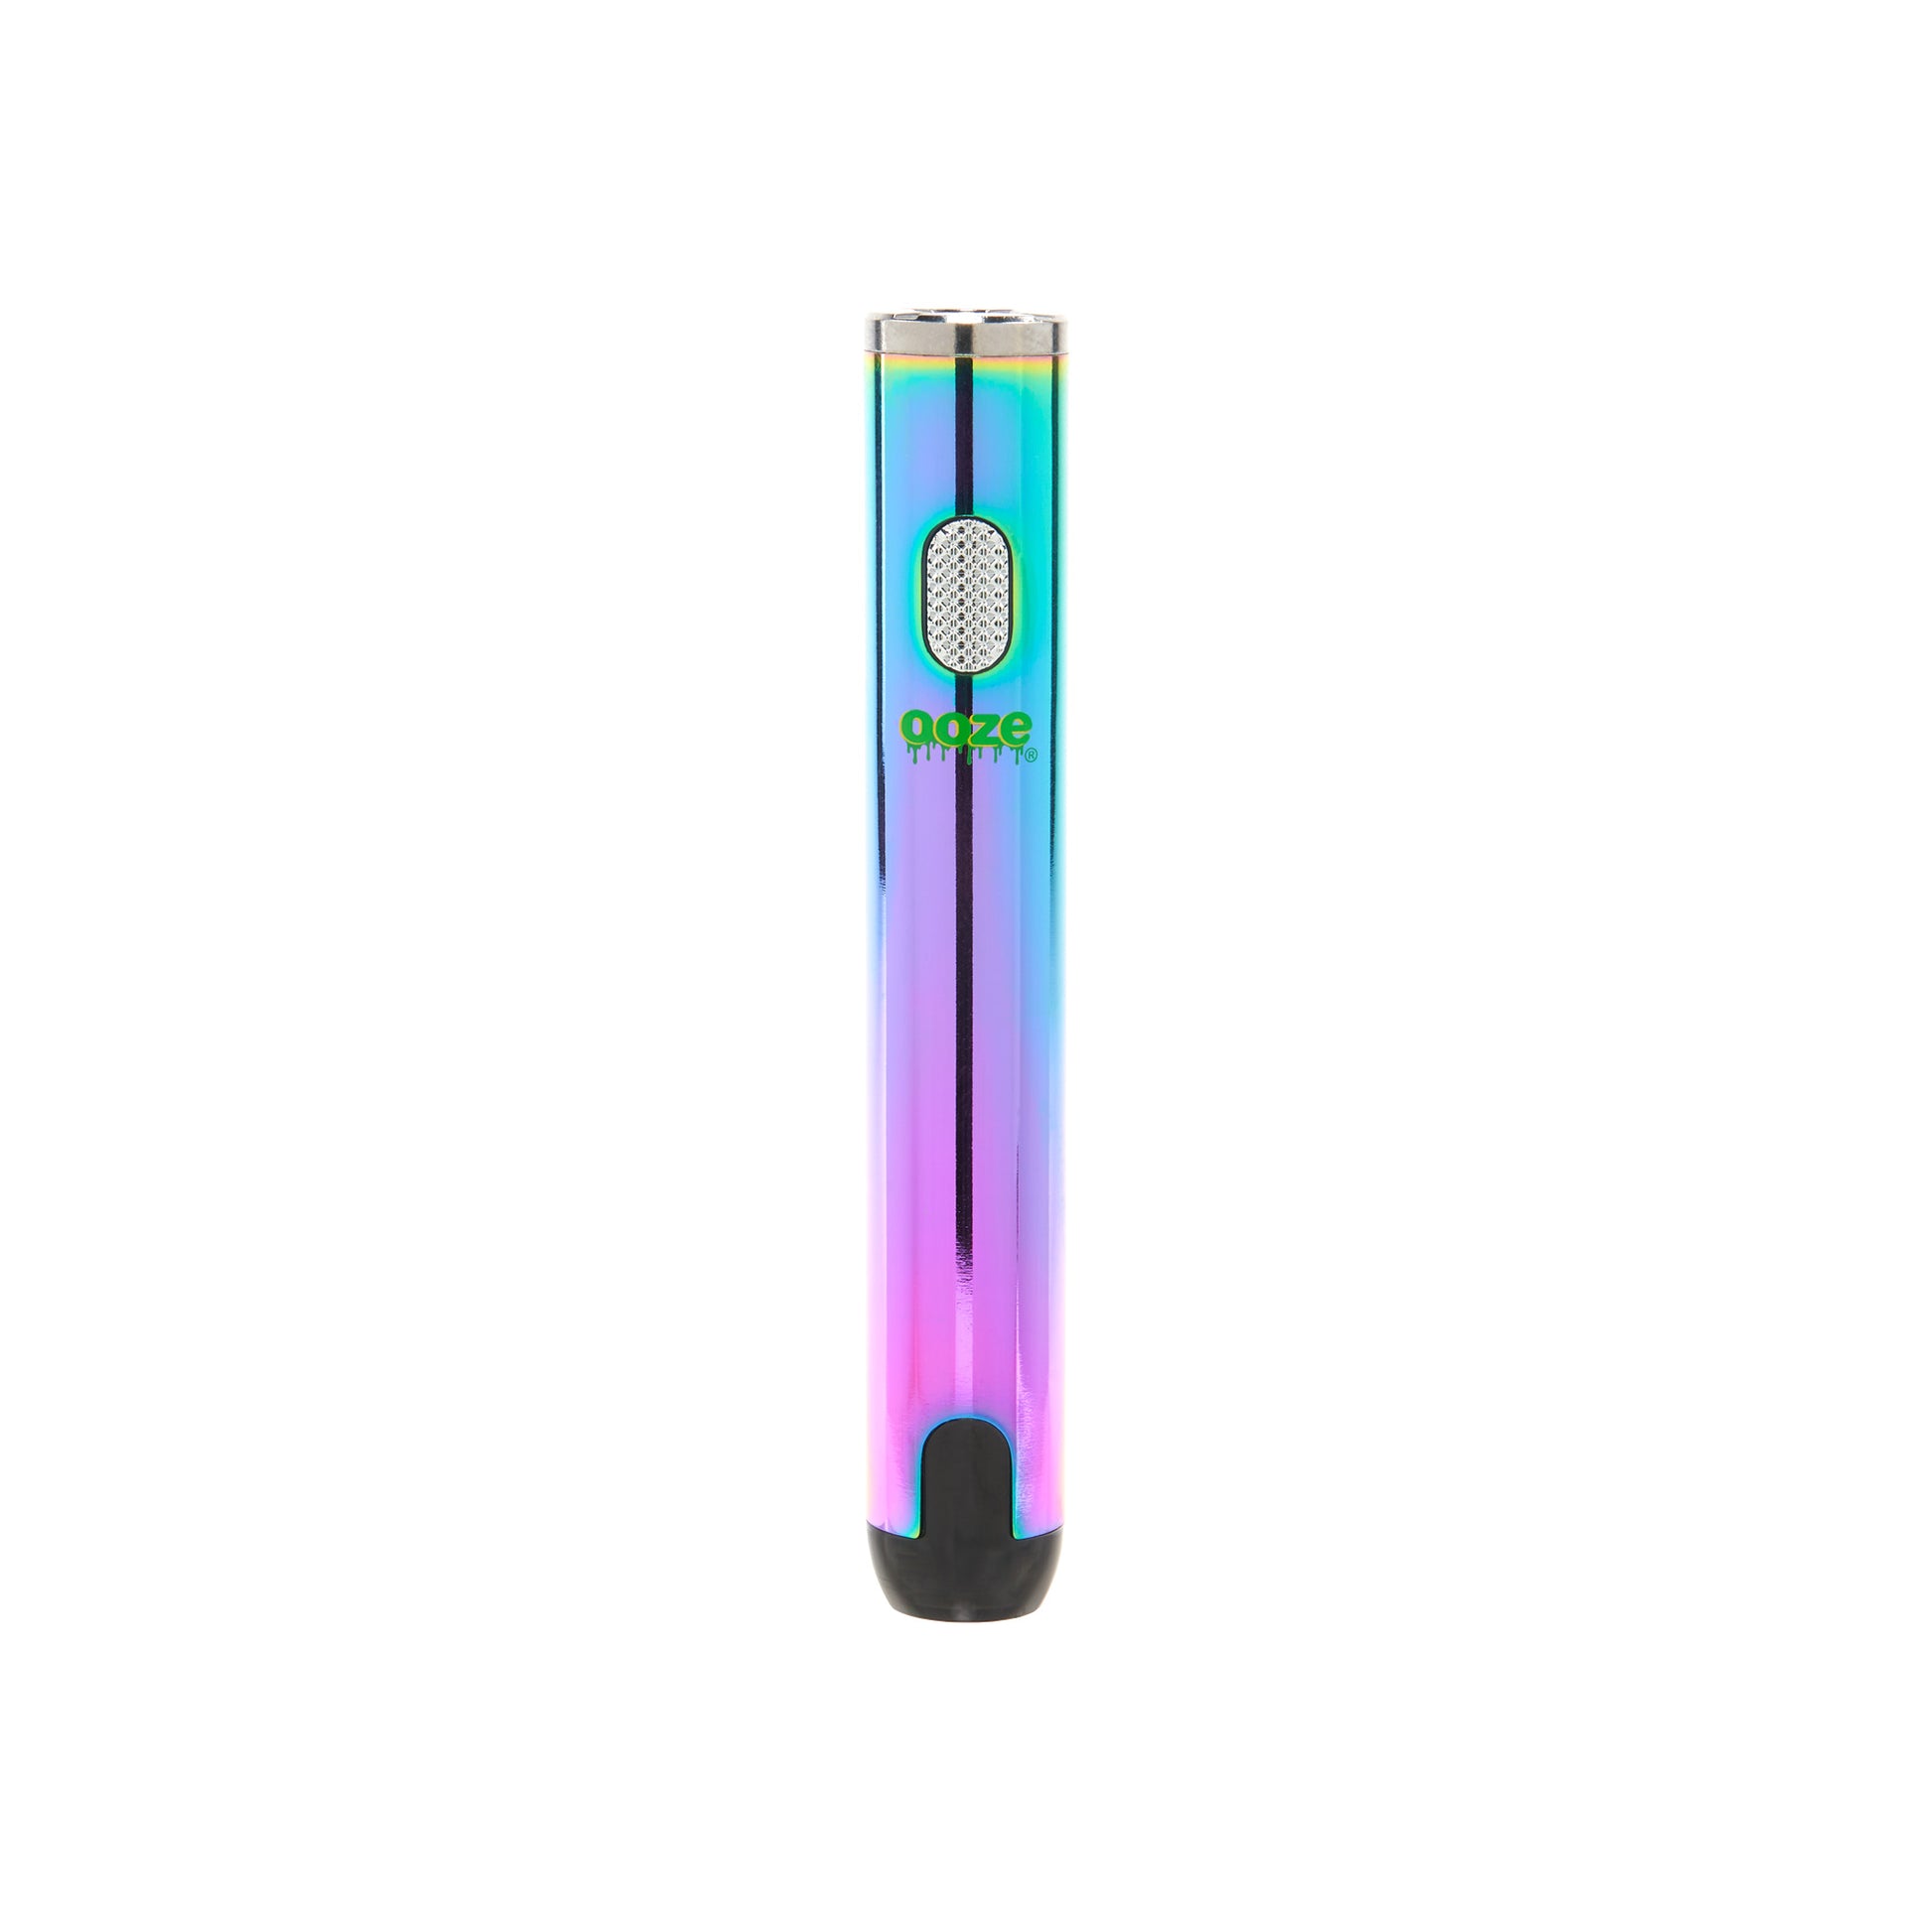 The rainbow Ooze Smart Battery is upright and turned off without the charger